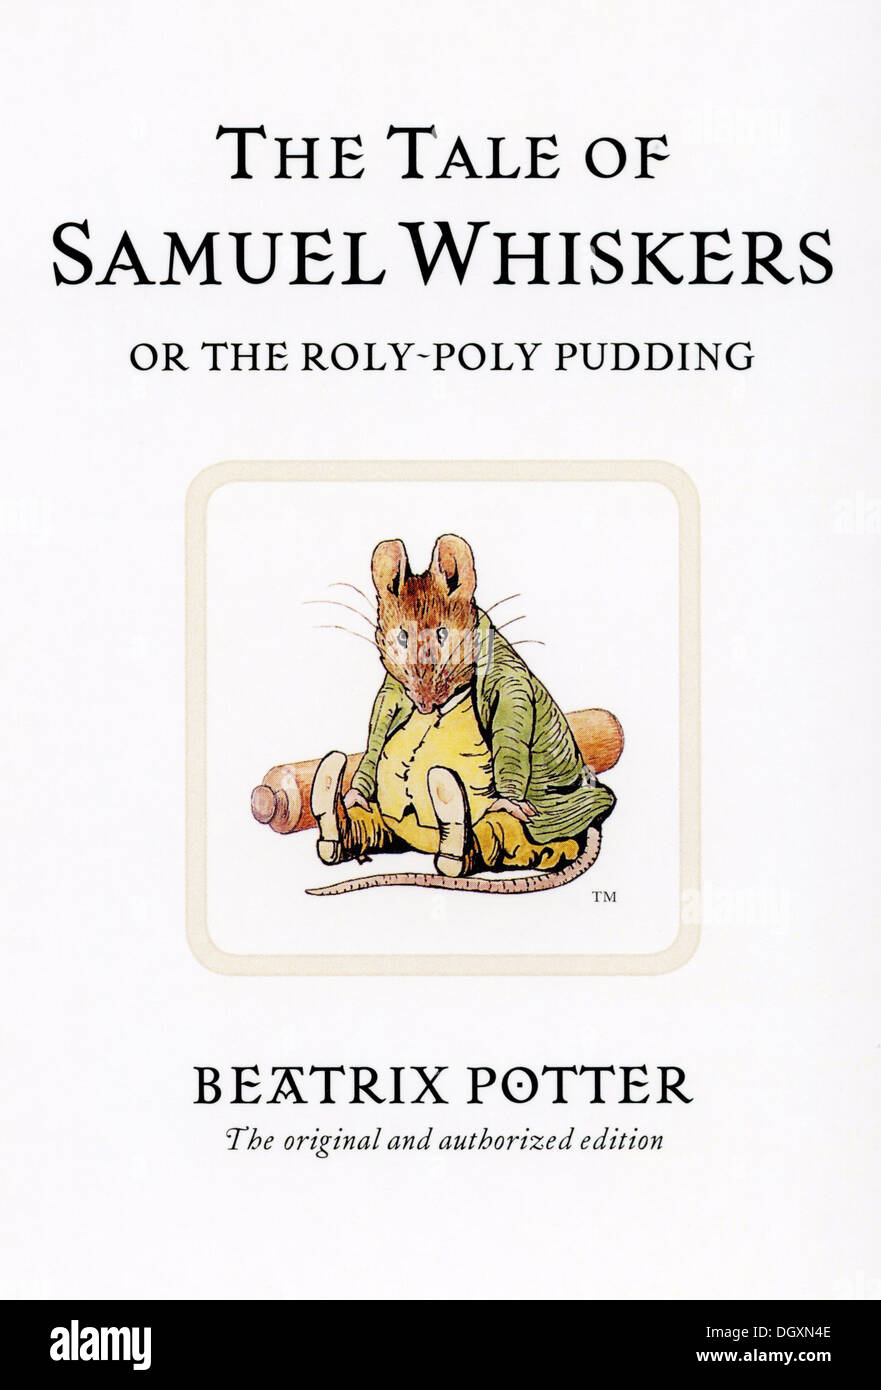 Beatrix Potter - The Tale of Samuel Whiskers book cover, 1908 Stock Photo